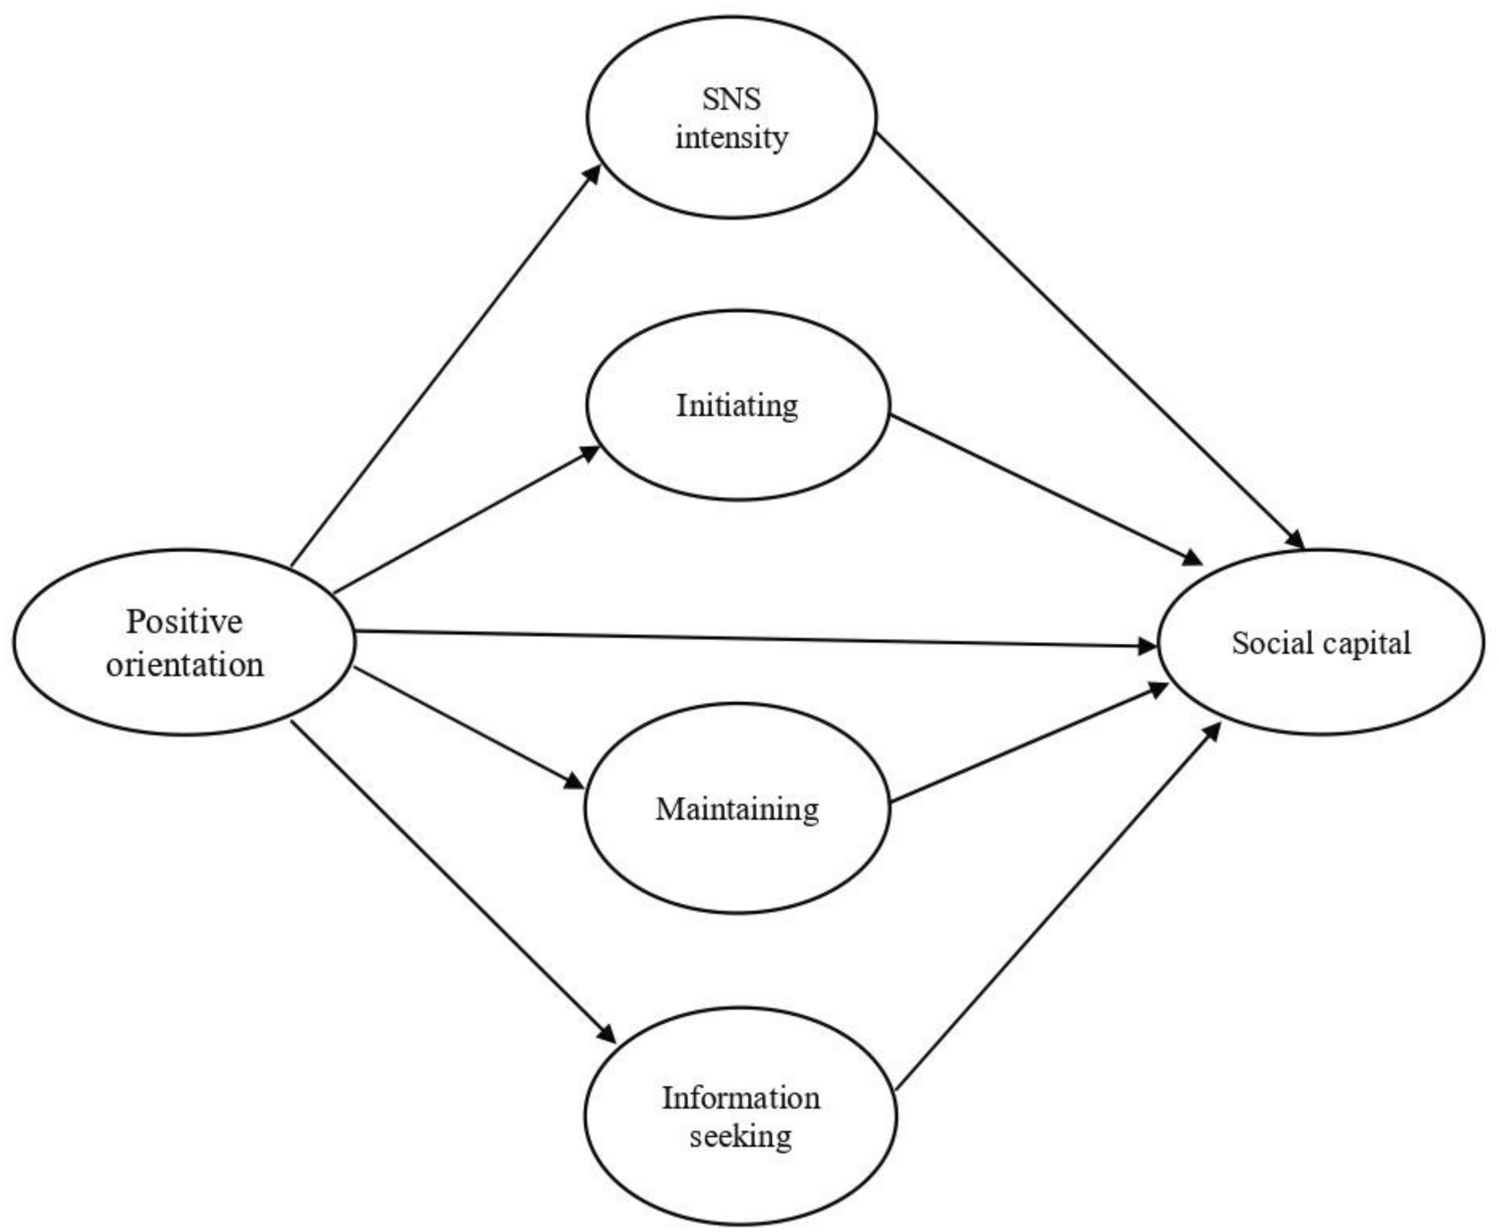 Positive Orientation and Social Capital: The Insignificance of the Mediating Effects of Social Network Sites Usages